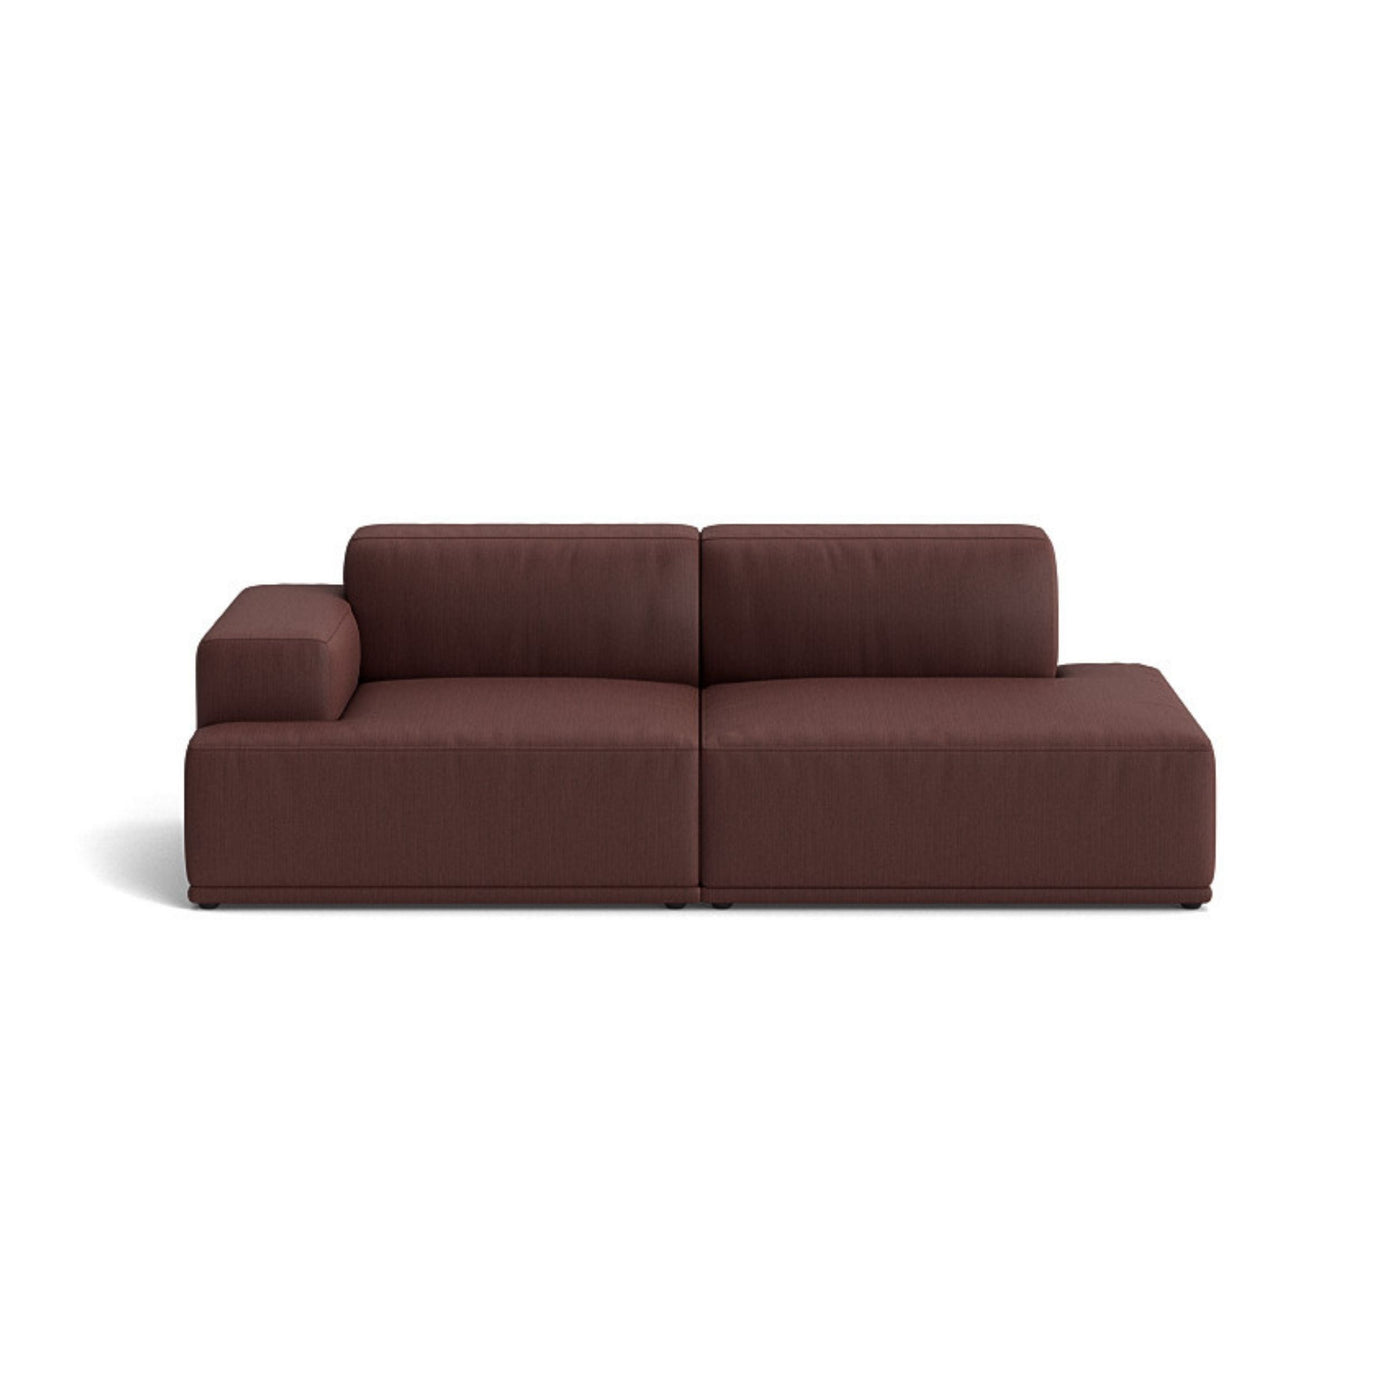 Muuto Connect Soft Modular 2 Seater Sofa, configuration 2. made-to-order from someday designs. #colour_balder-382